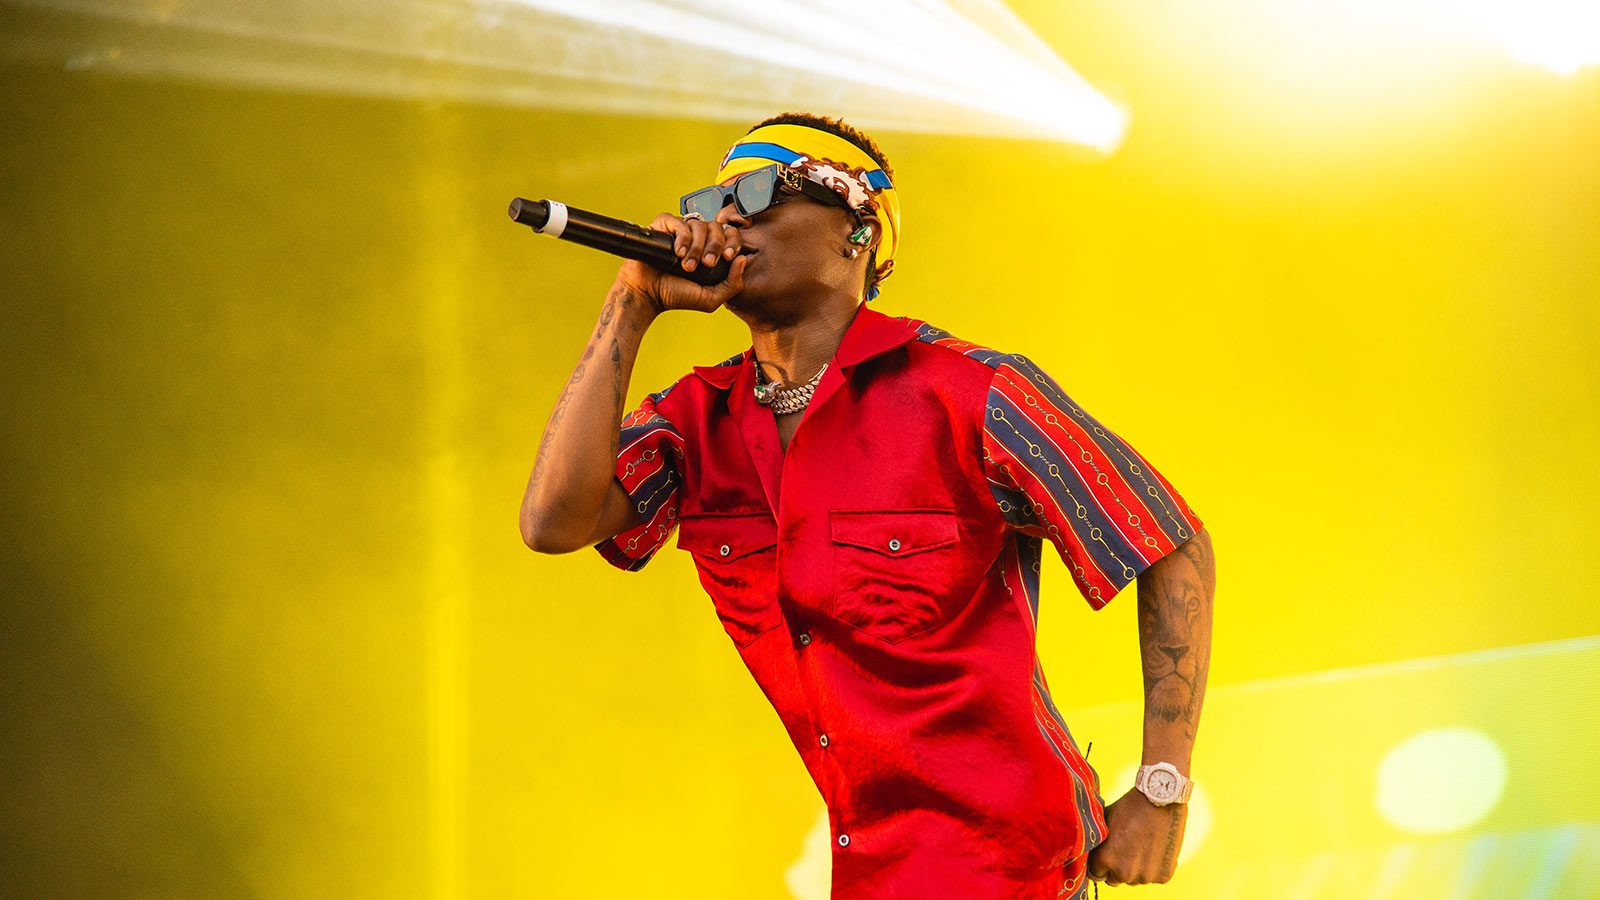 Who is Nigerian music star Wizkid – and why is he taking over the world?